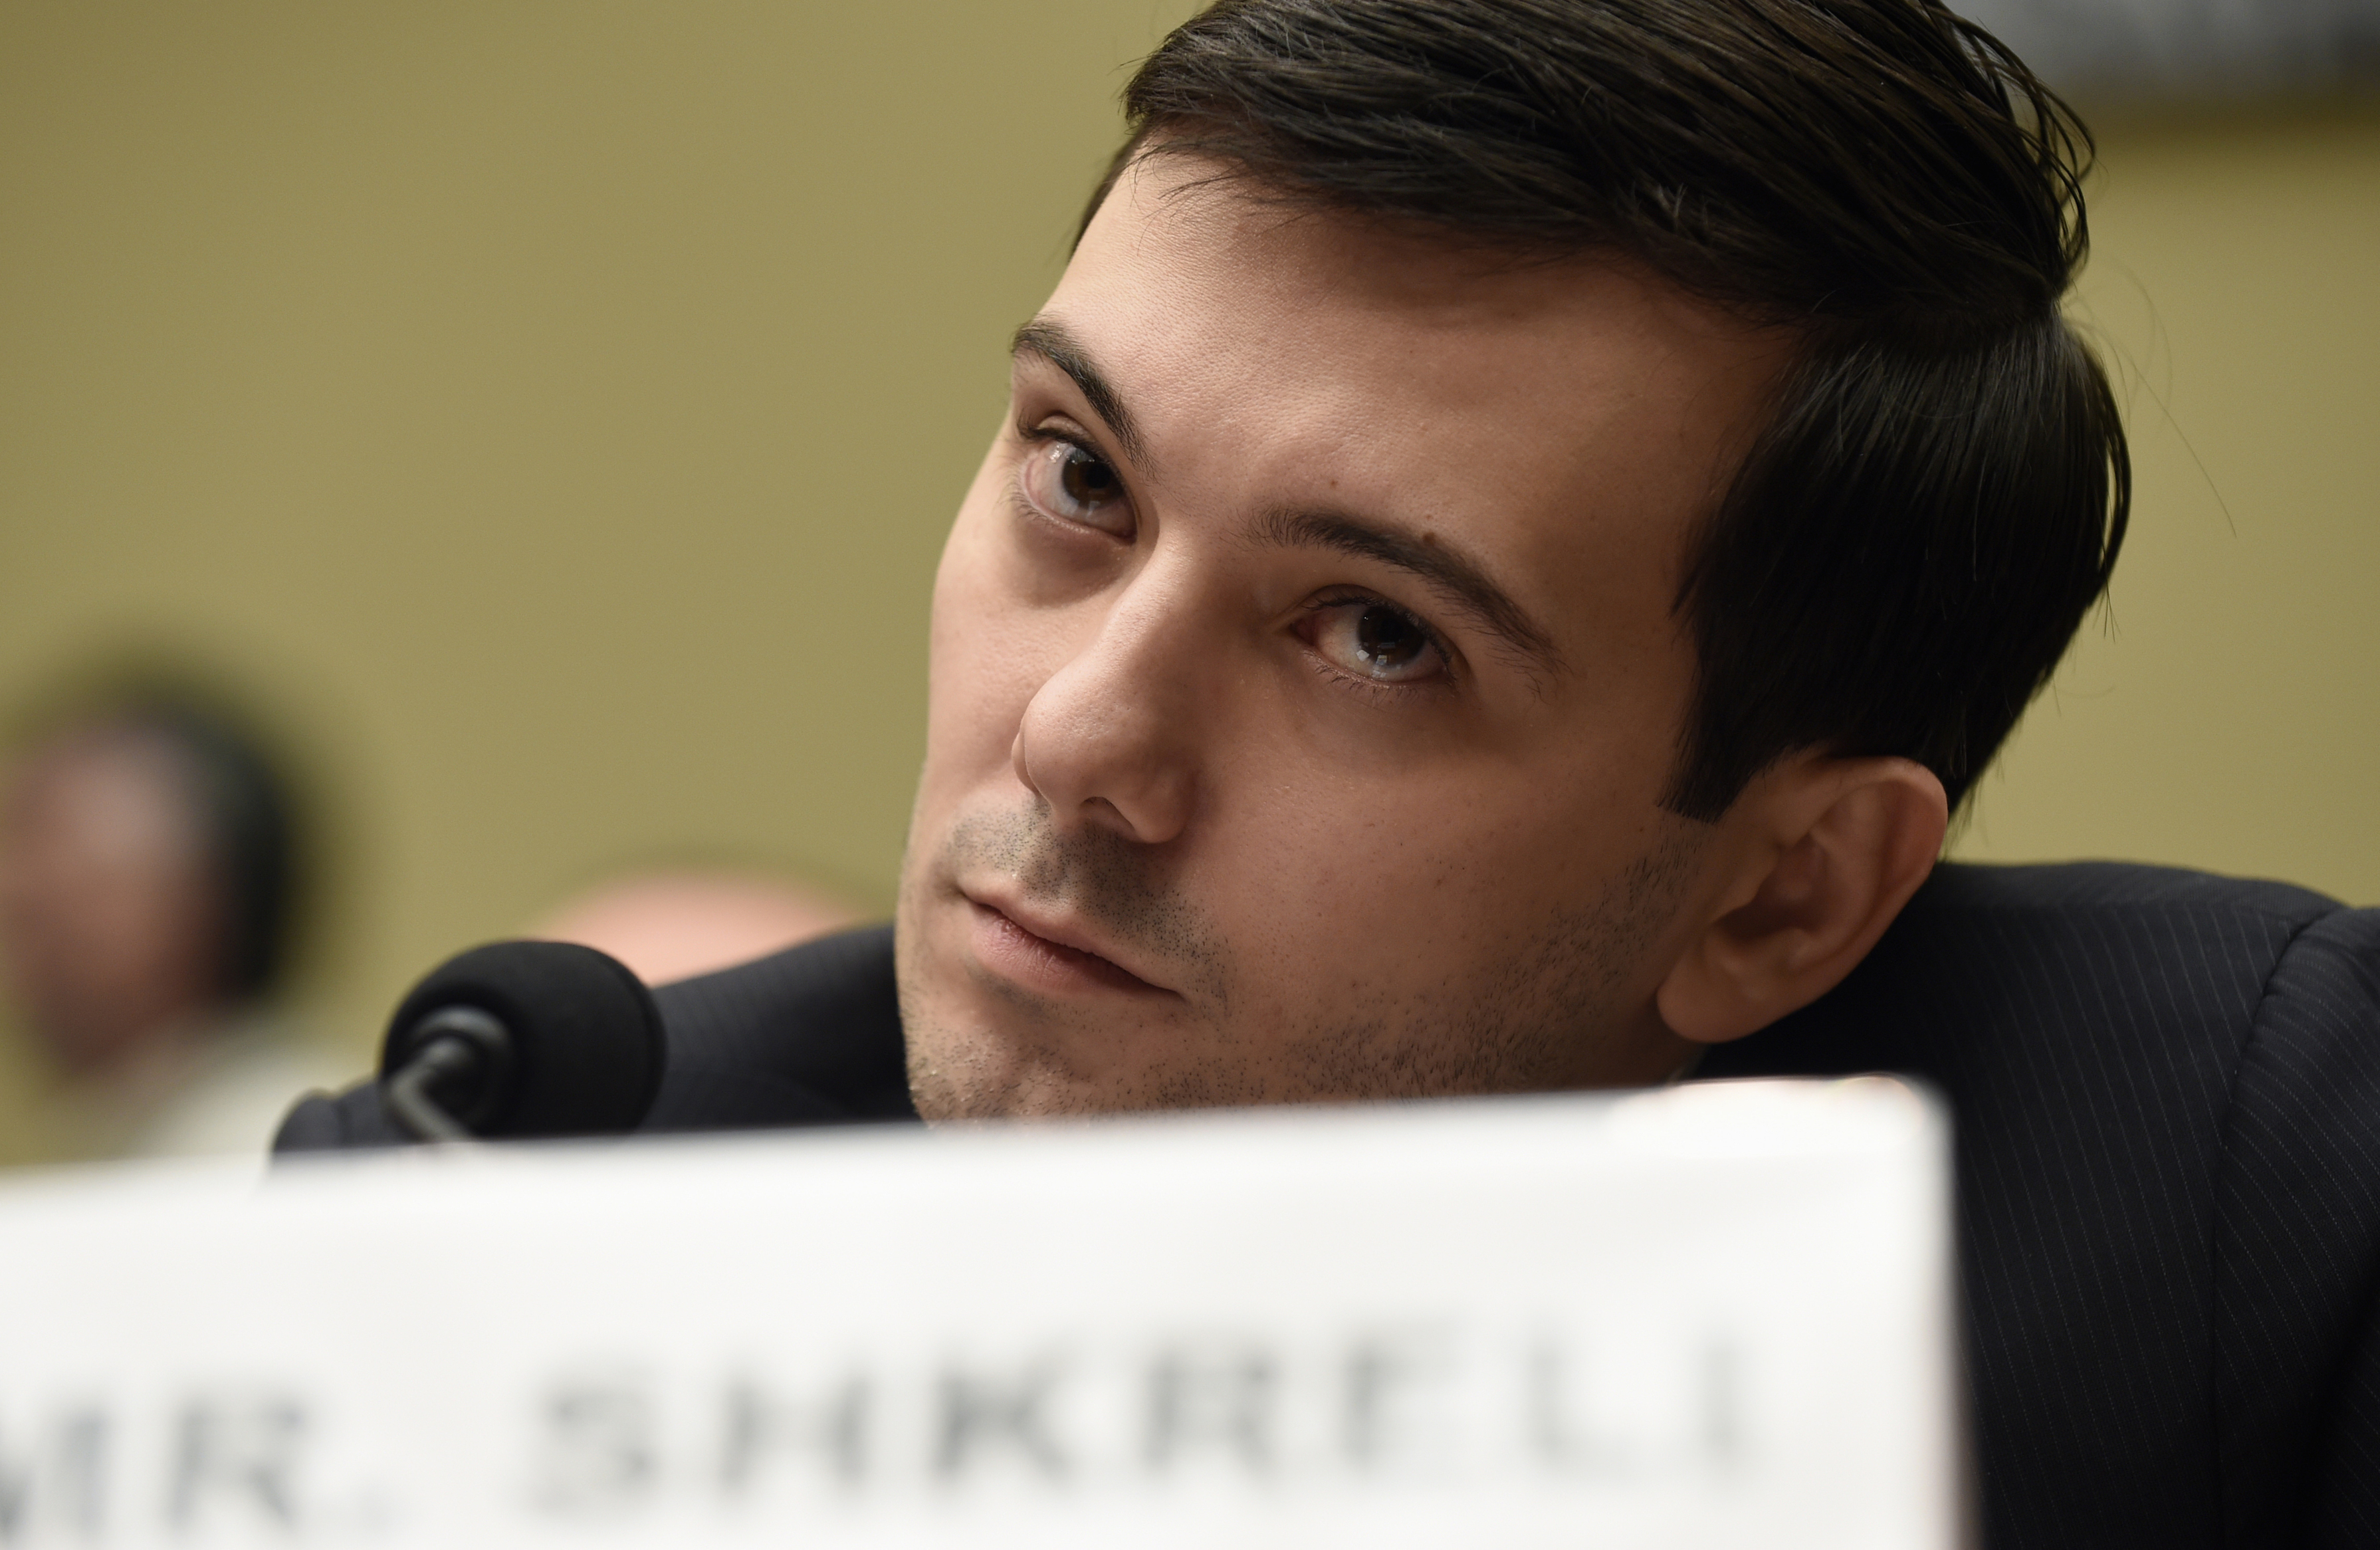 Former Turing Pharmaceuticals CEO Martin Shkreli attends the House Committee on Oversight and Reform Committee hearing on Capitol Hill in Washington, Feb. 4, 2016. A federal judge on Friday, Jan. 14, 2022 ordered Shkreli to return $64.6 million in profits he and his company reaped from inflating the price of the life-saving drug Daraprim and barred him from participating in the pharmaceutical industry for the rest of his life.